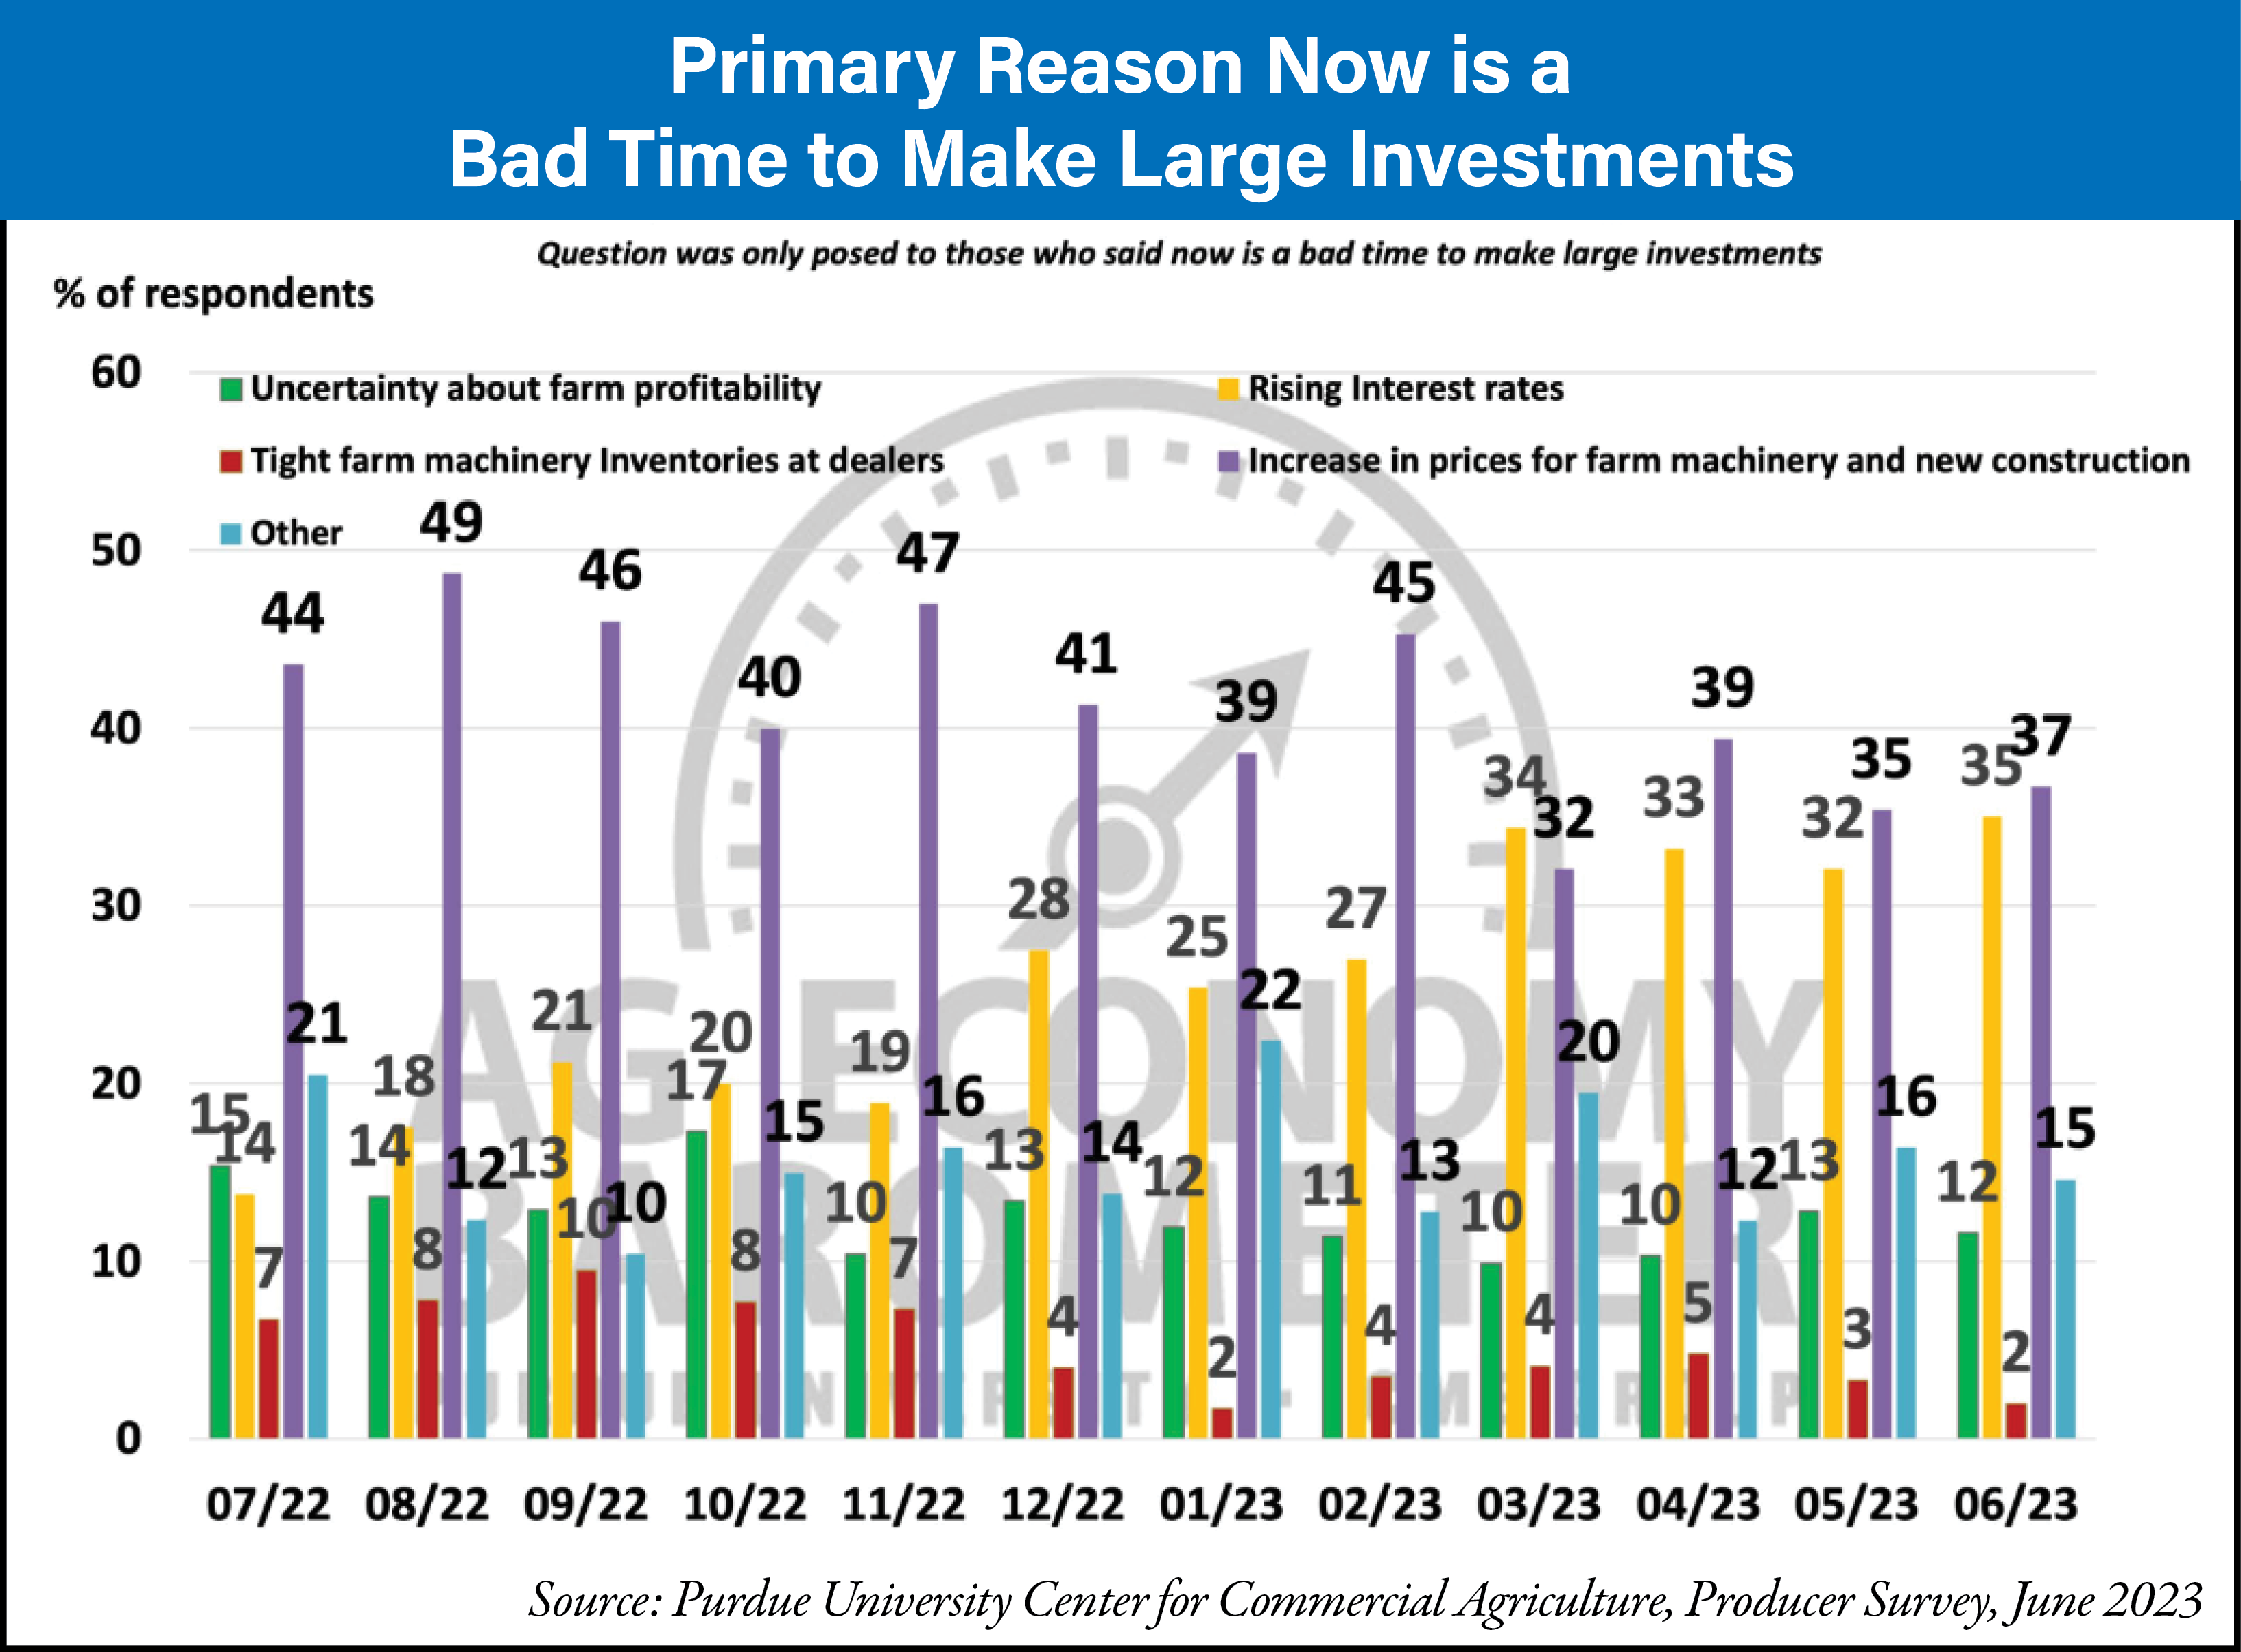 primary-reason-now-is-a-bad-time-to-make-large-investments_07-23_700px.png